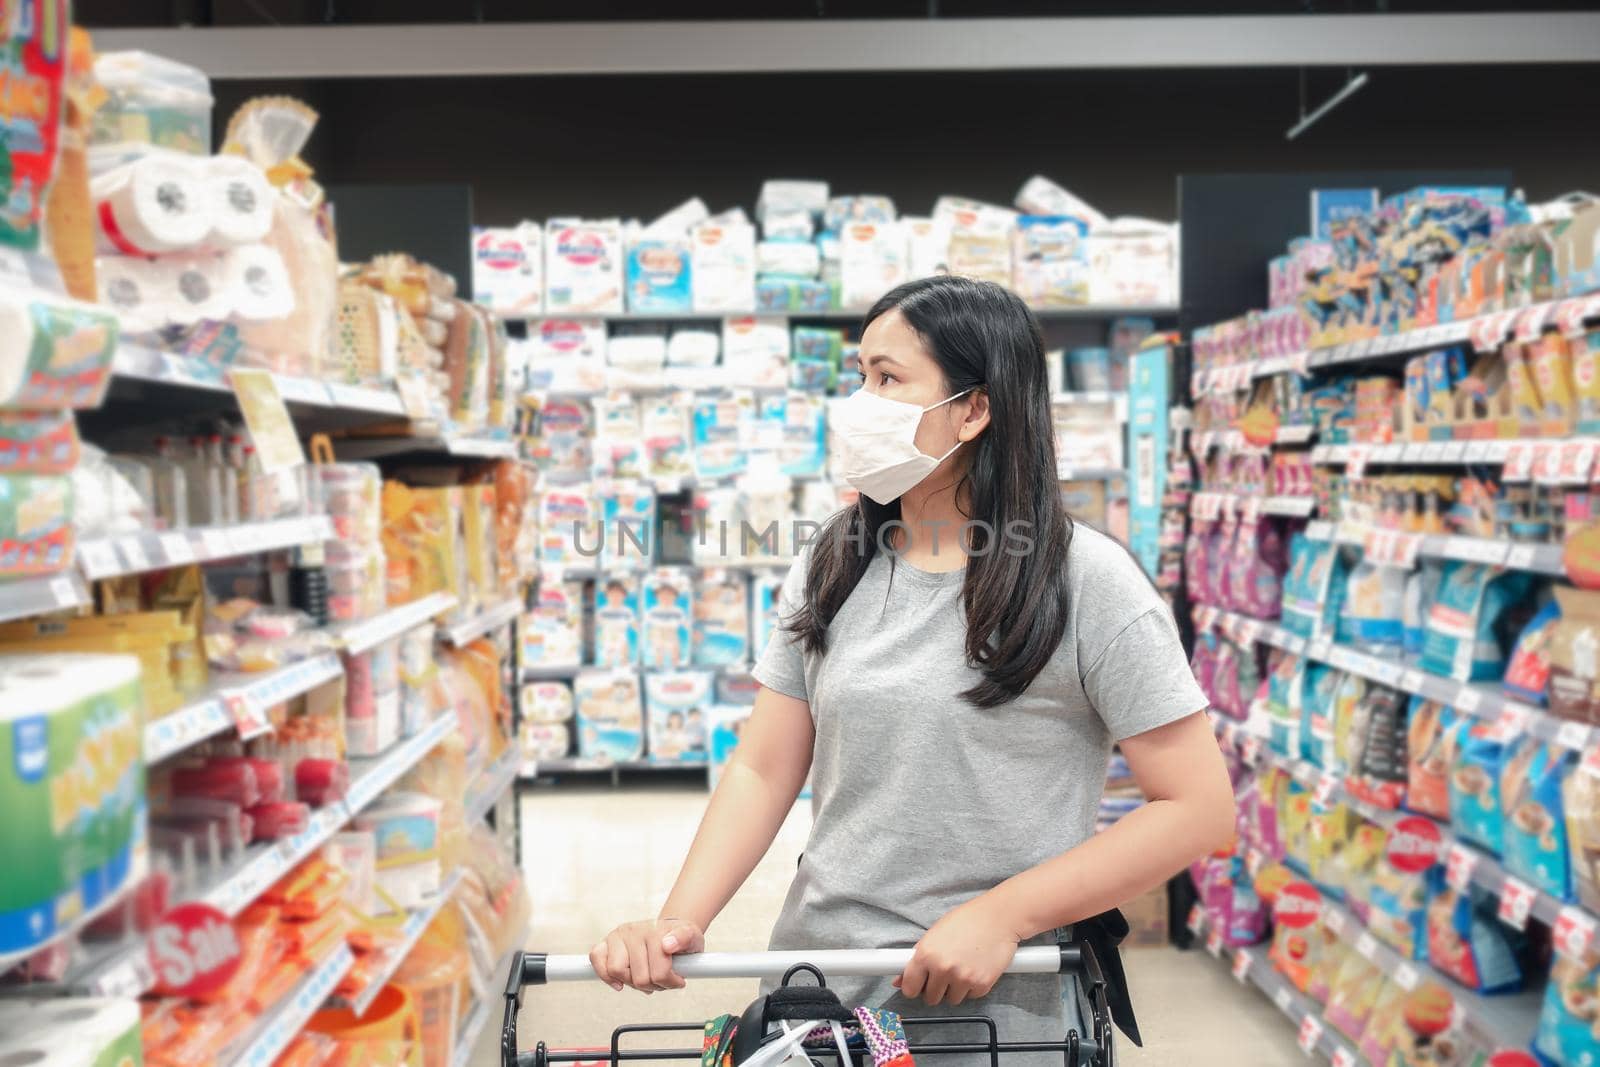 Customer Asian Woman Wearing Face Mask With Shopping Cart in Supermarket Department Store Shop While Choosing and Looking Goods on Shelf During Covid-19 Pandemic. Coronavirus Covid Situation by MahaHeang245789